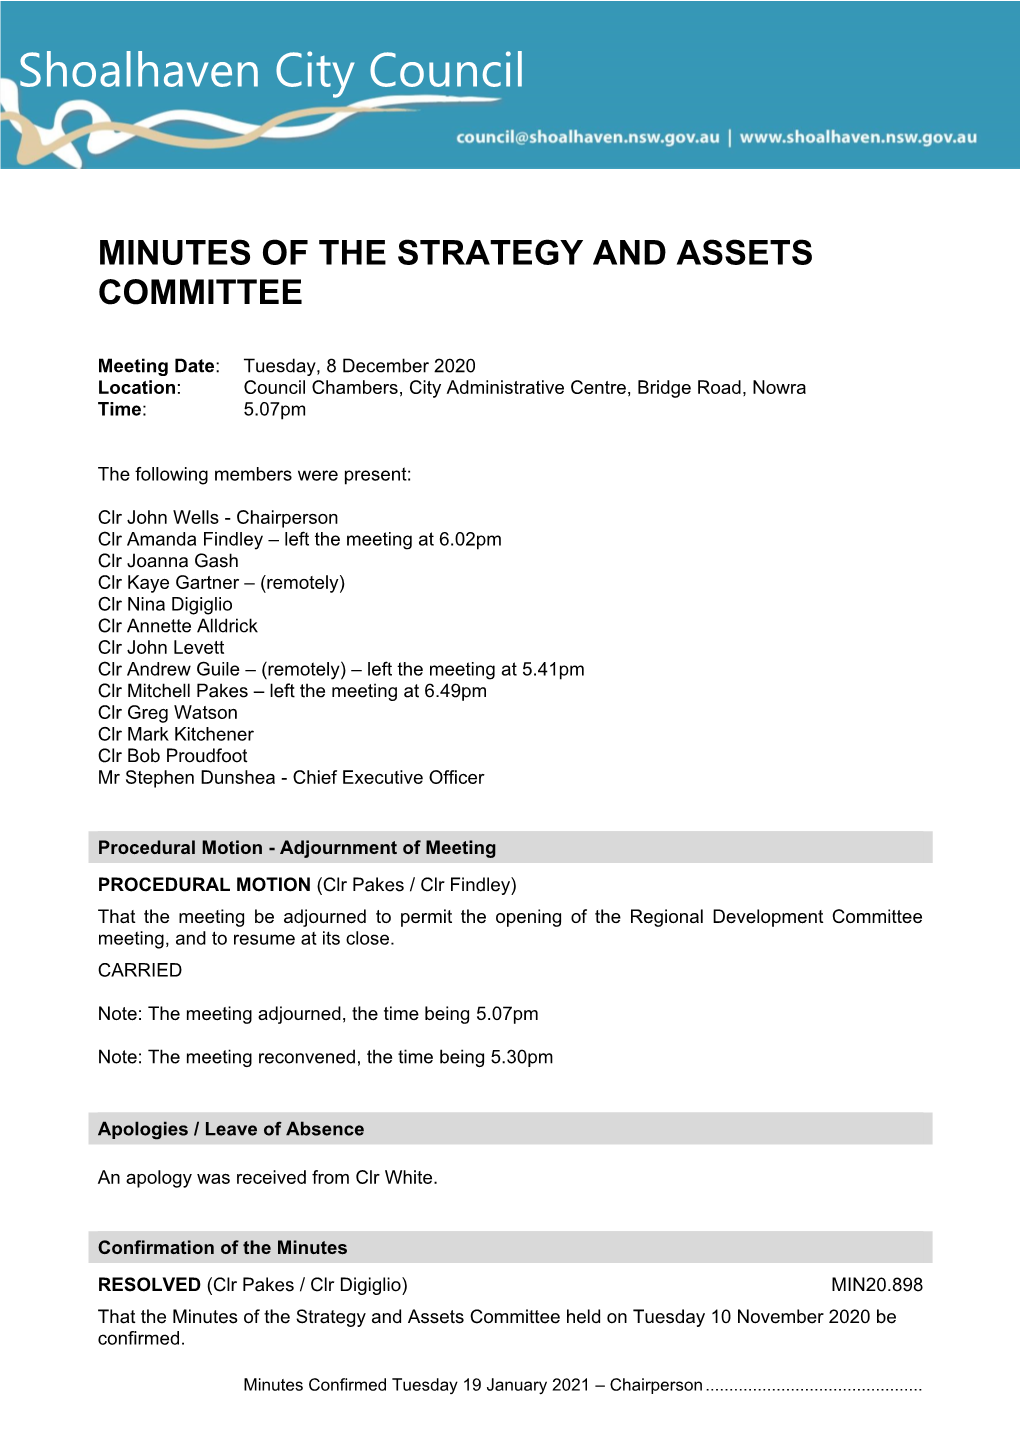 Minutes of Strategy and Assets Committee